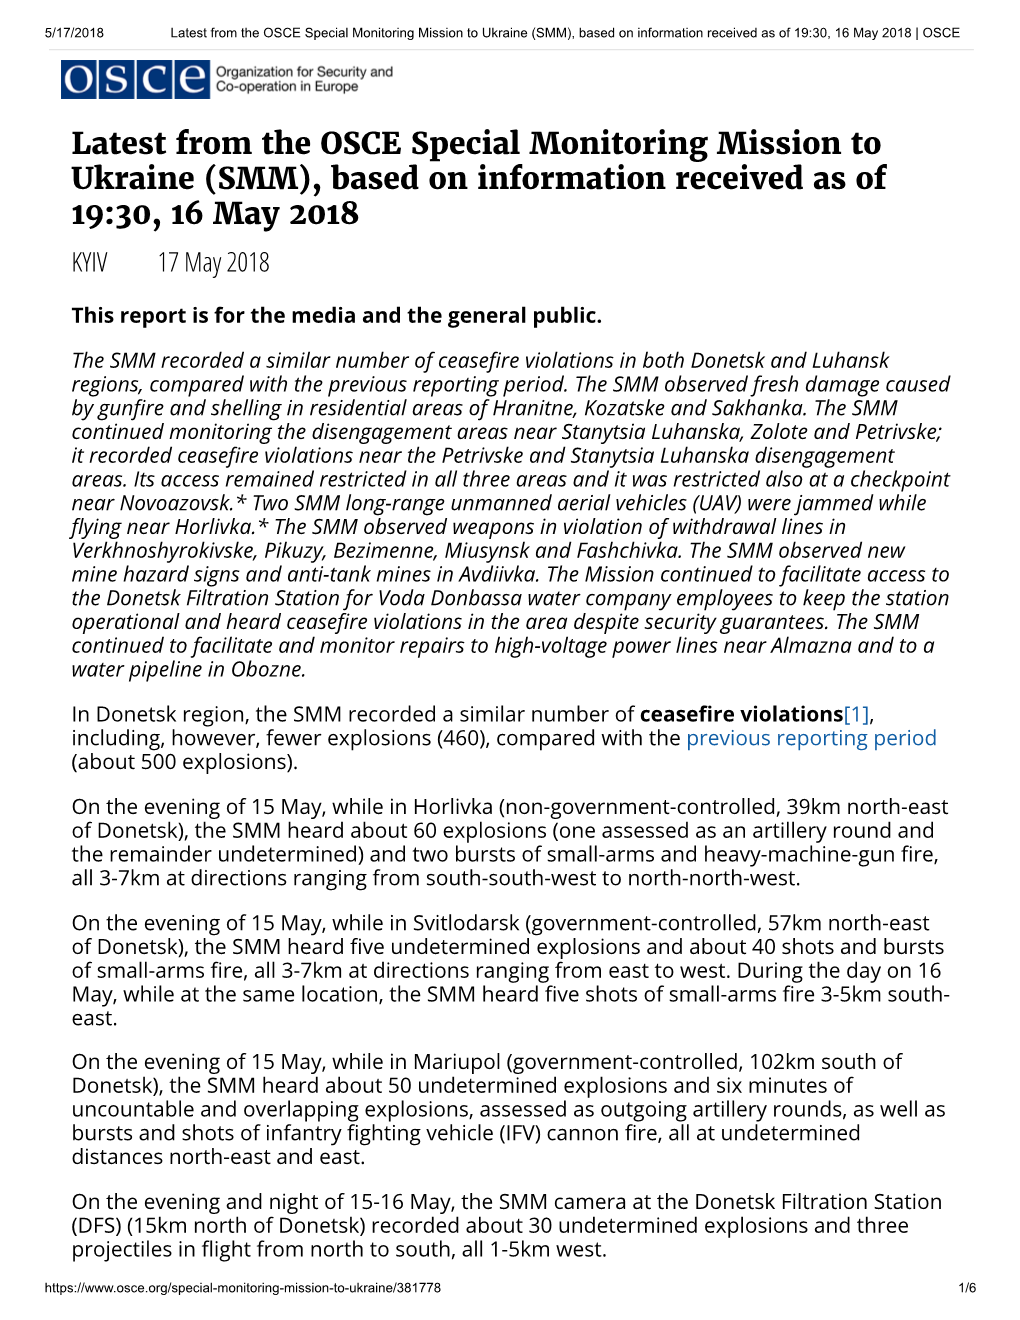 Latest from the OSCE Special Monitoring Mission to Ukraine (SMM), Based on Information Received As of 19:30, 16 May 2018 | OSCE